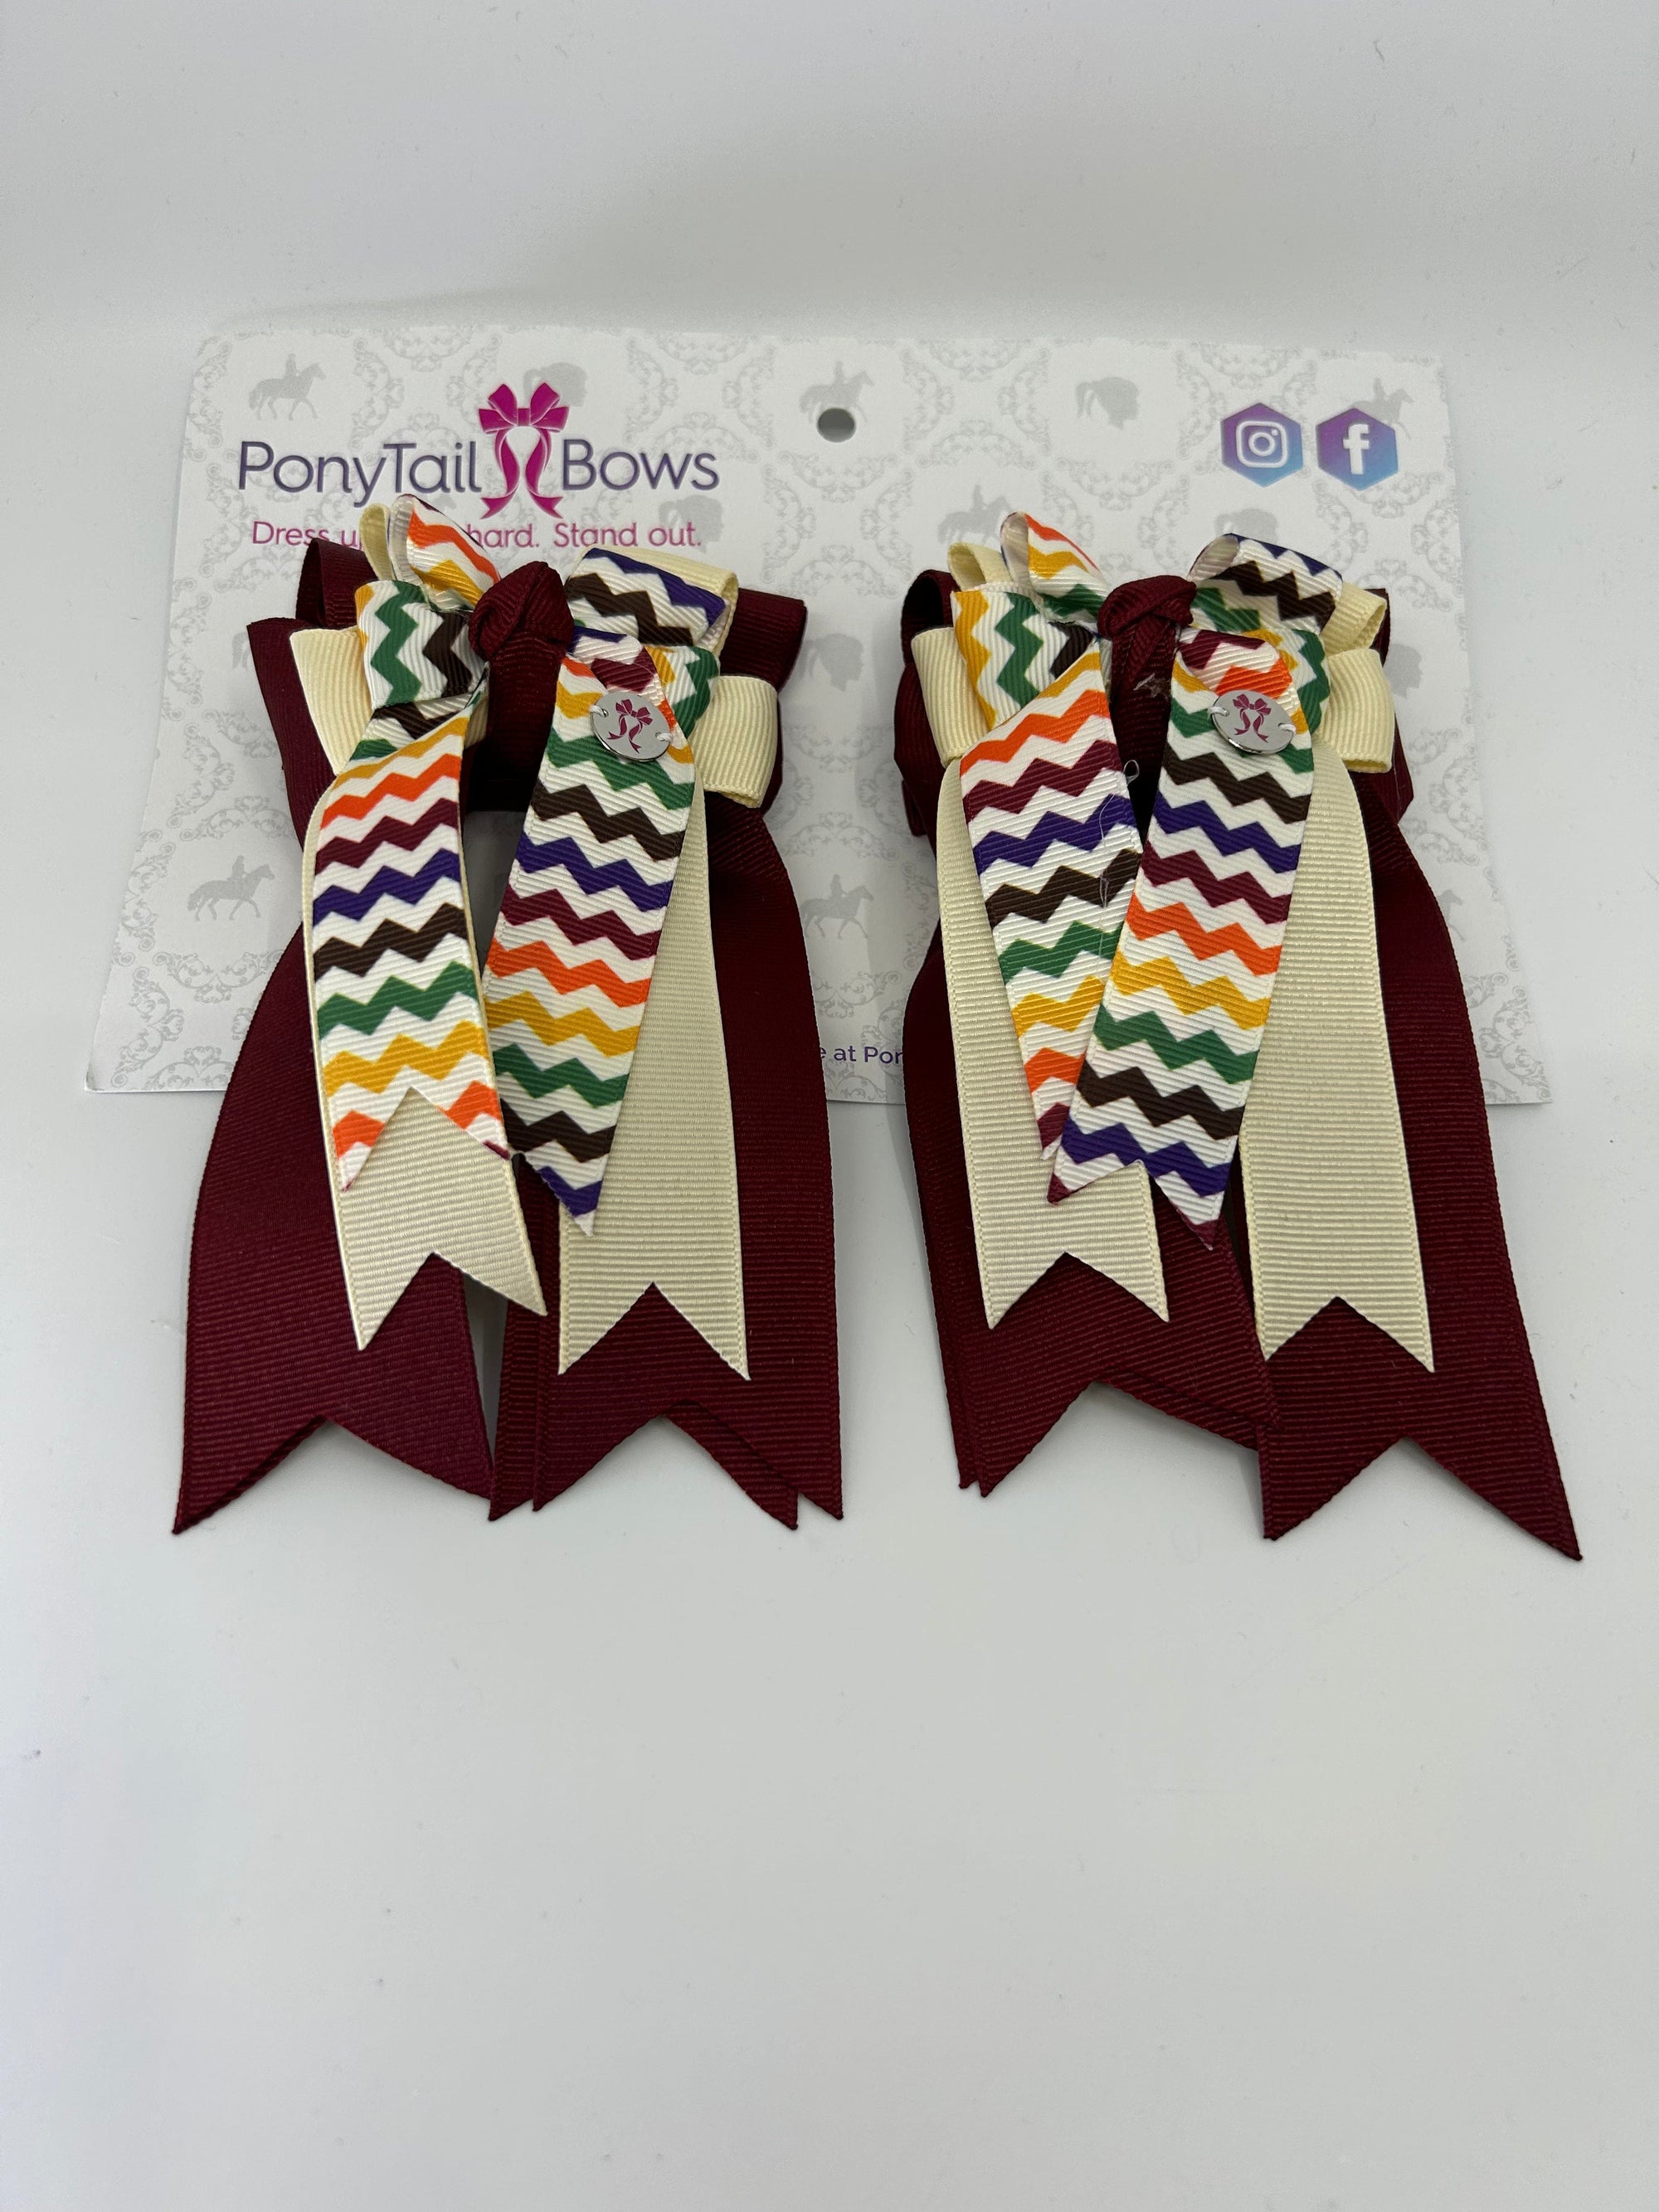 PonyTail Bows 3" Tails Autumn Chevron PonyTail Bows equestrian team apparel online tack store mobile tack store custom farm apparel custom show stable clothing equestrian lifestyle horse show clothing riding clothes PonyTail Bows | Equestrian Hair Accessories horses equestrian tack store